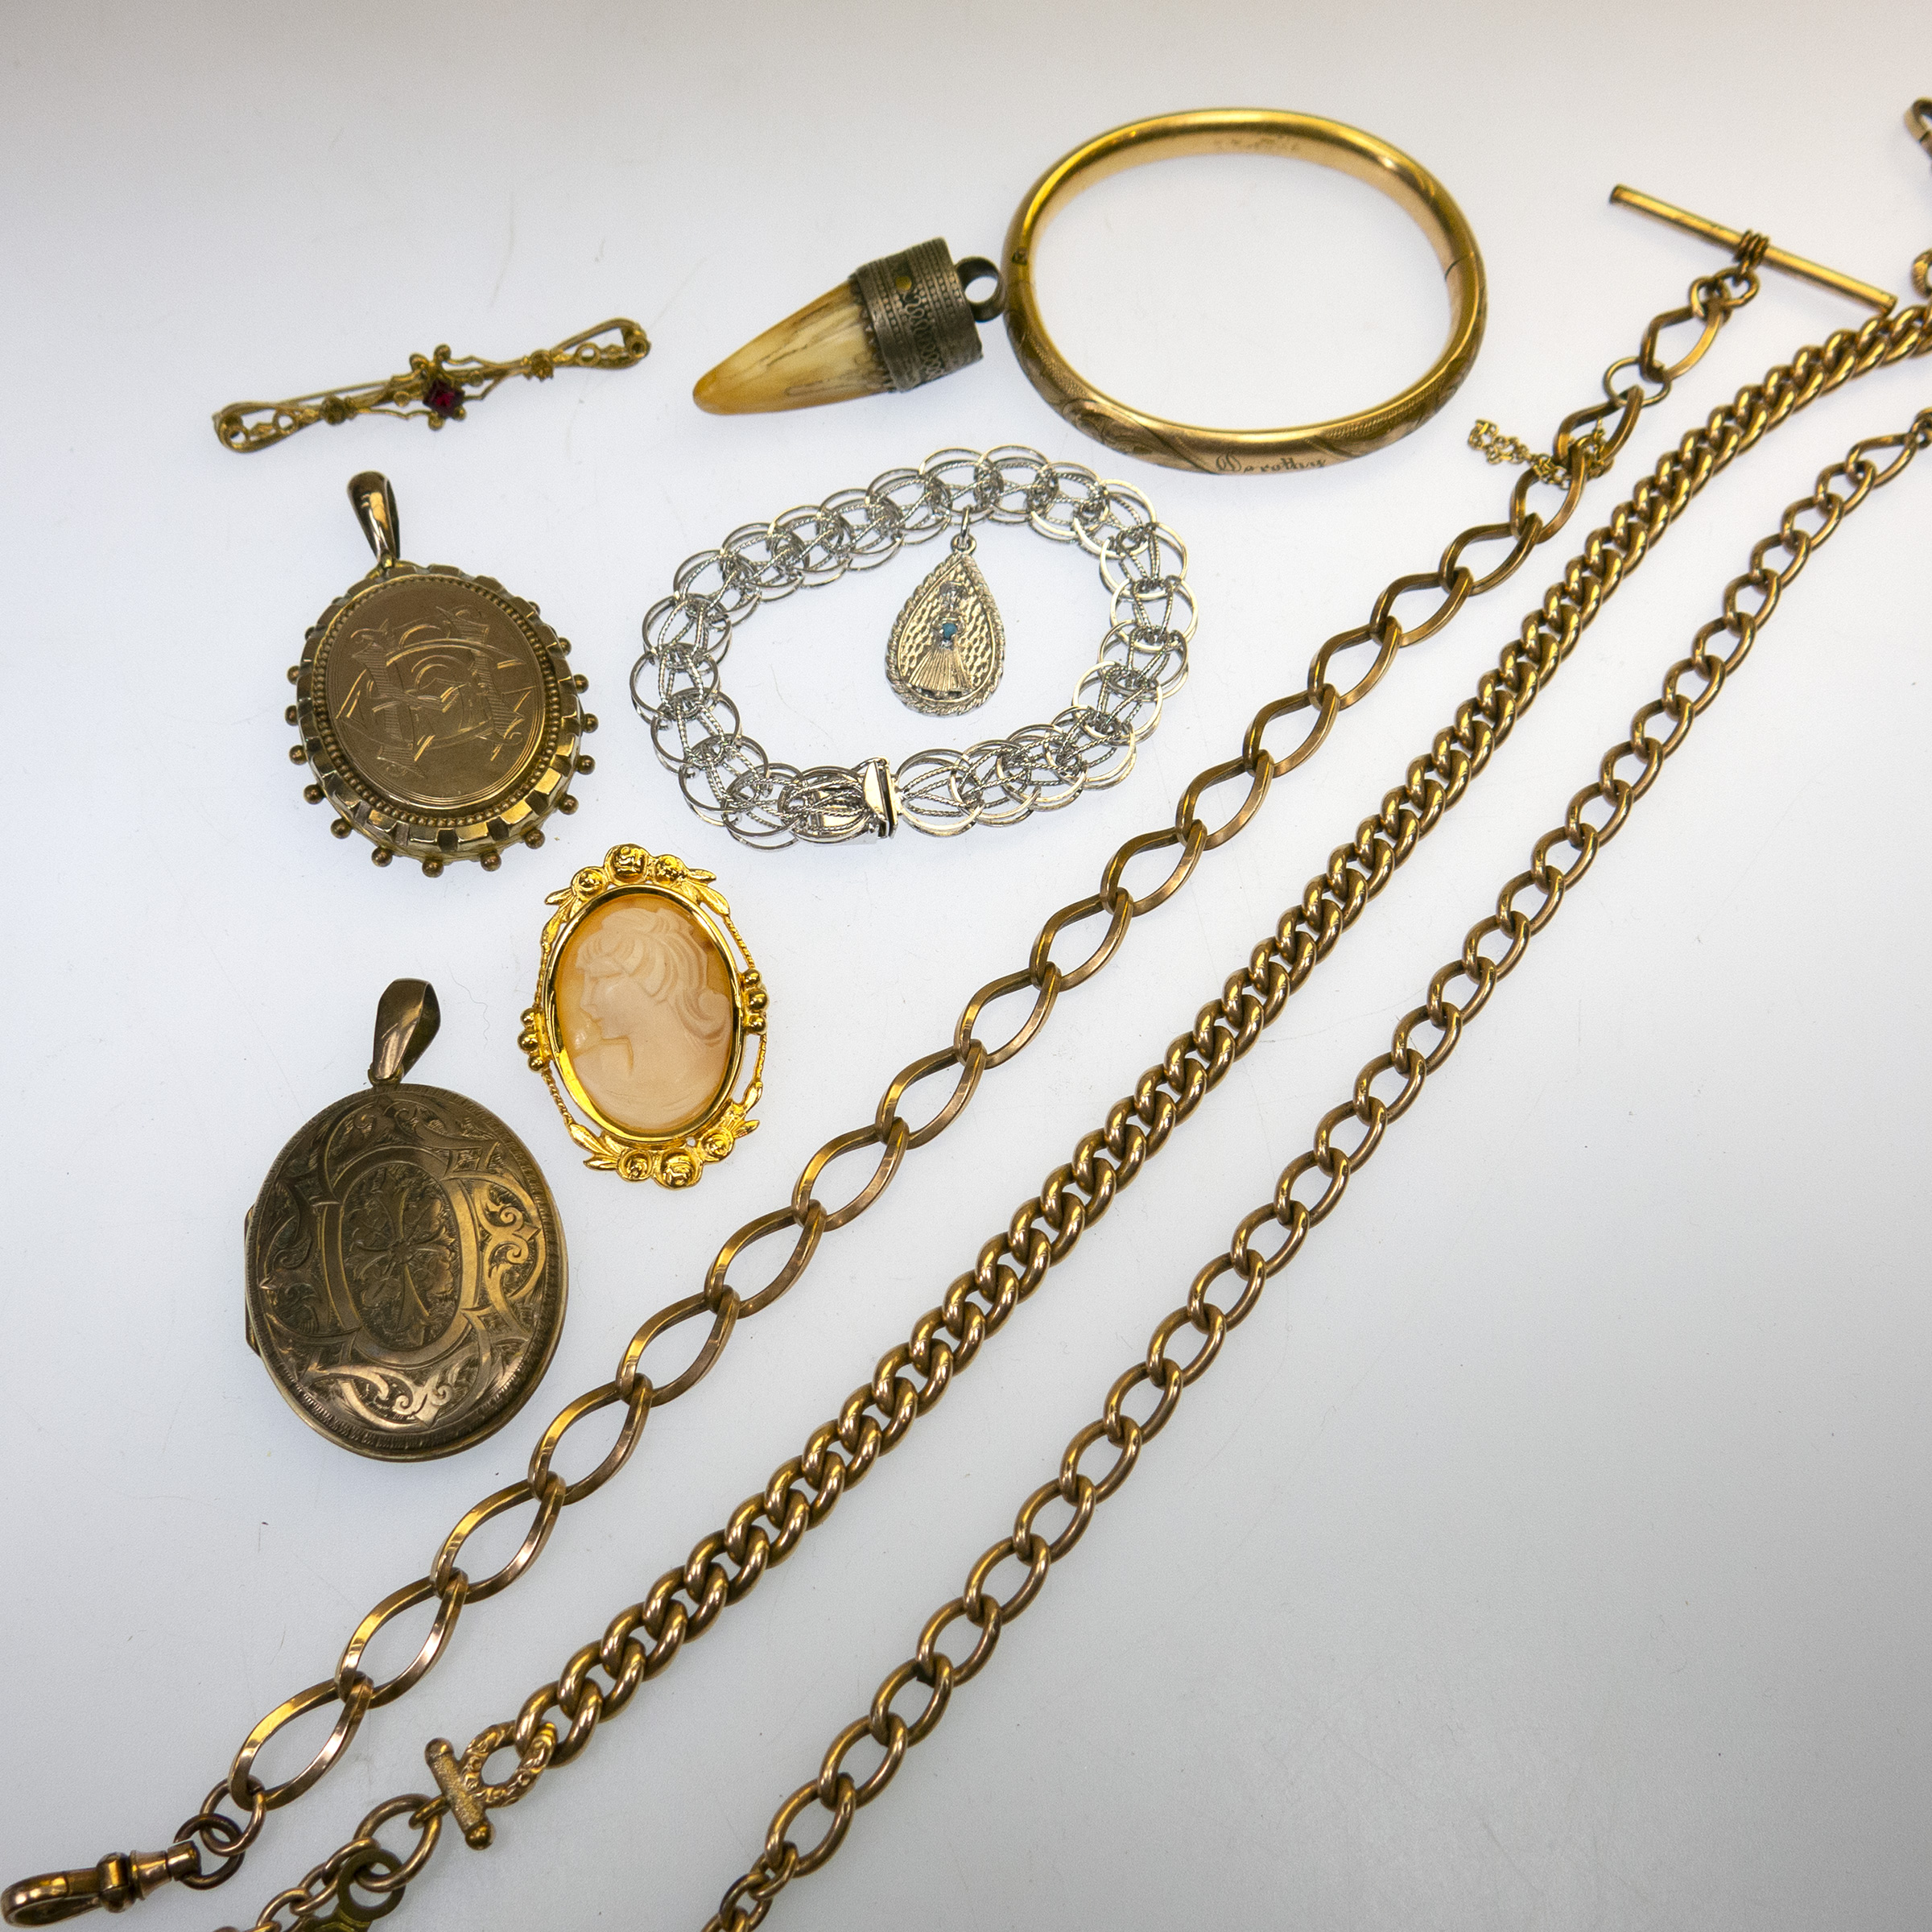 Small Quantity Of Costume, Gold-Filled And Silver Jewellery